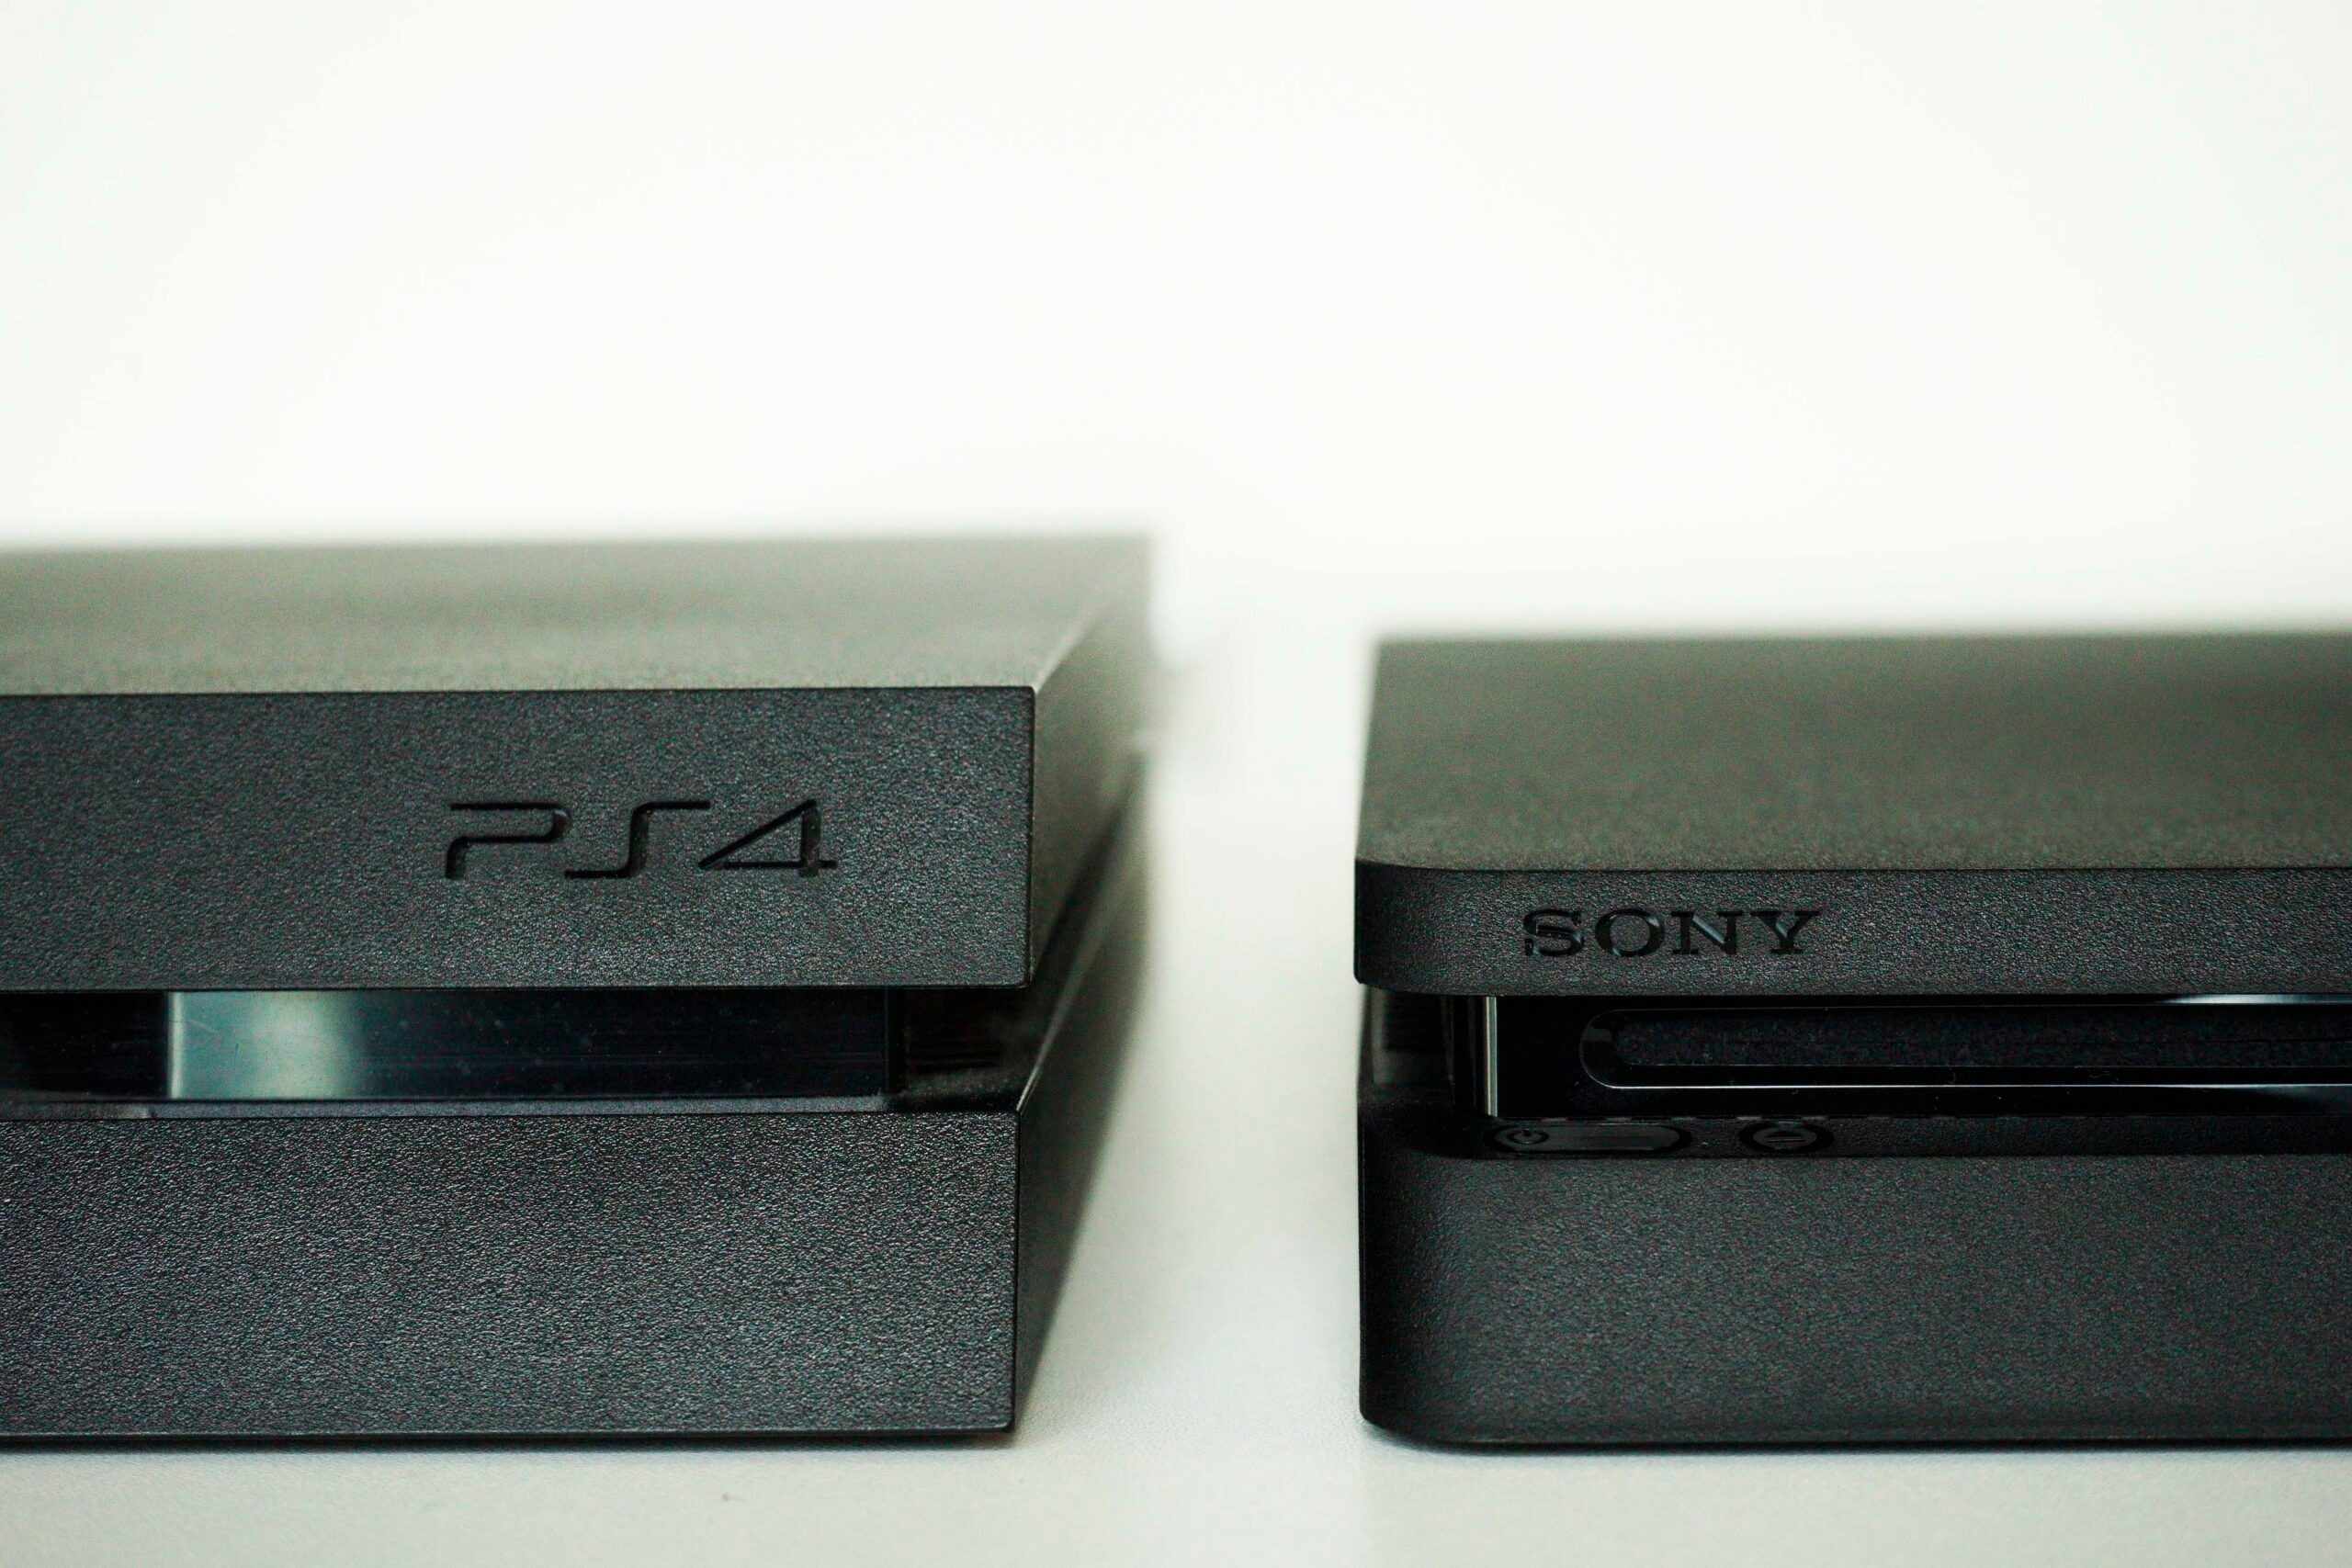 How to add PS4 storage space